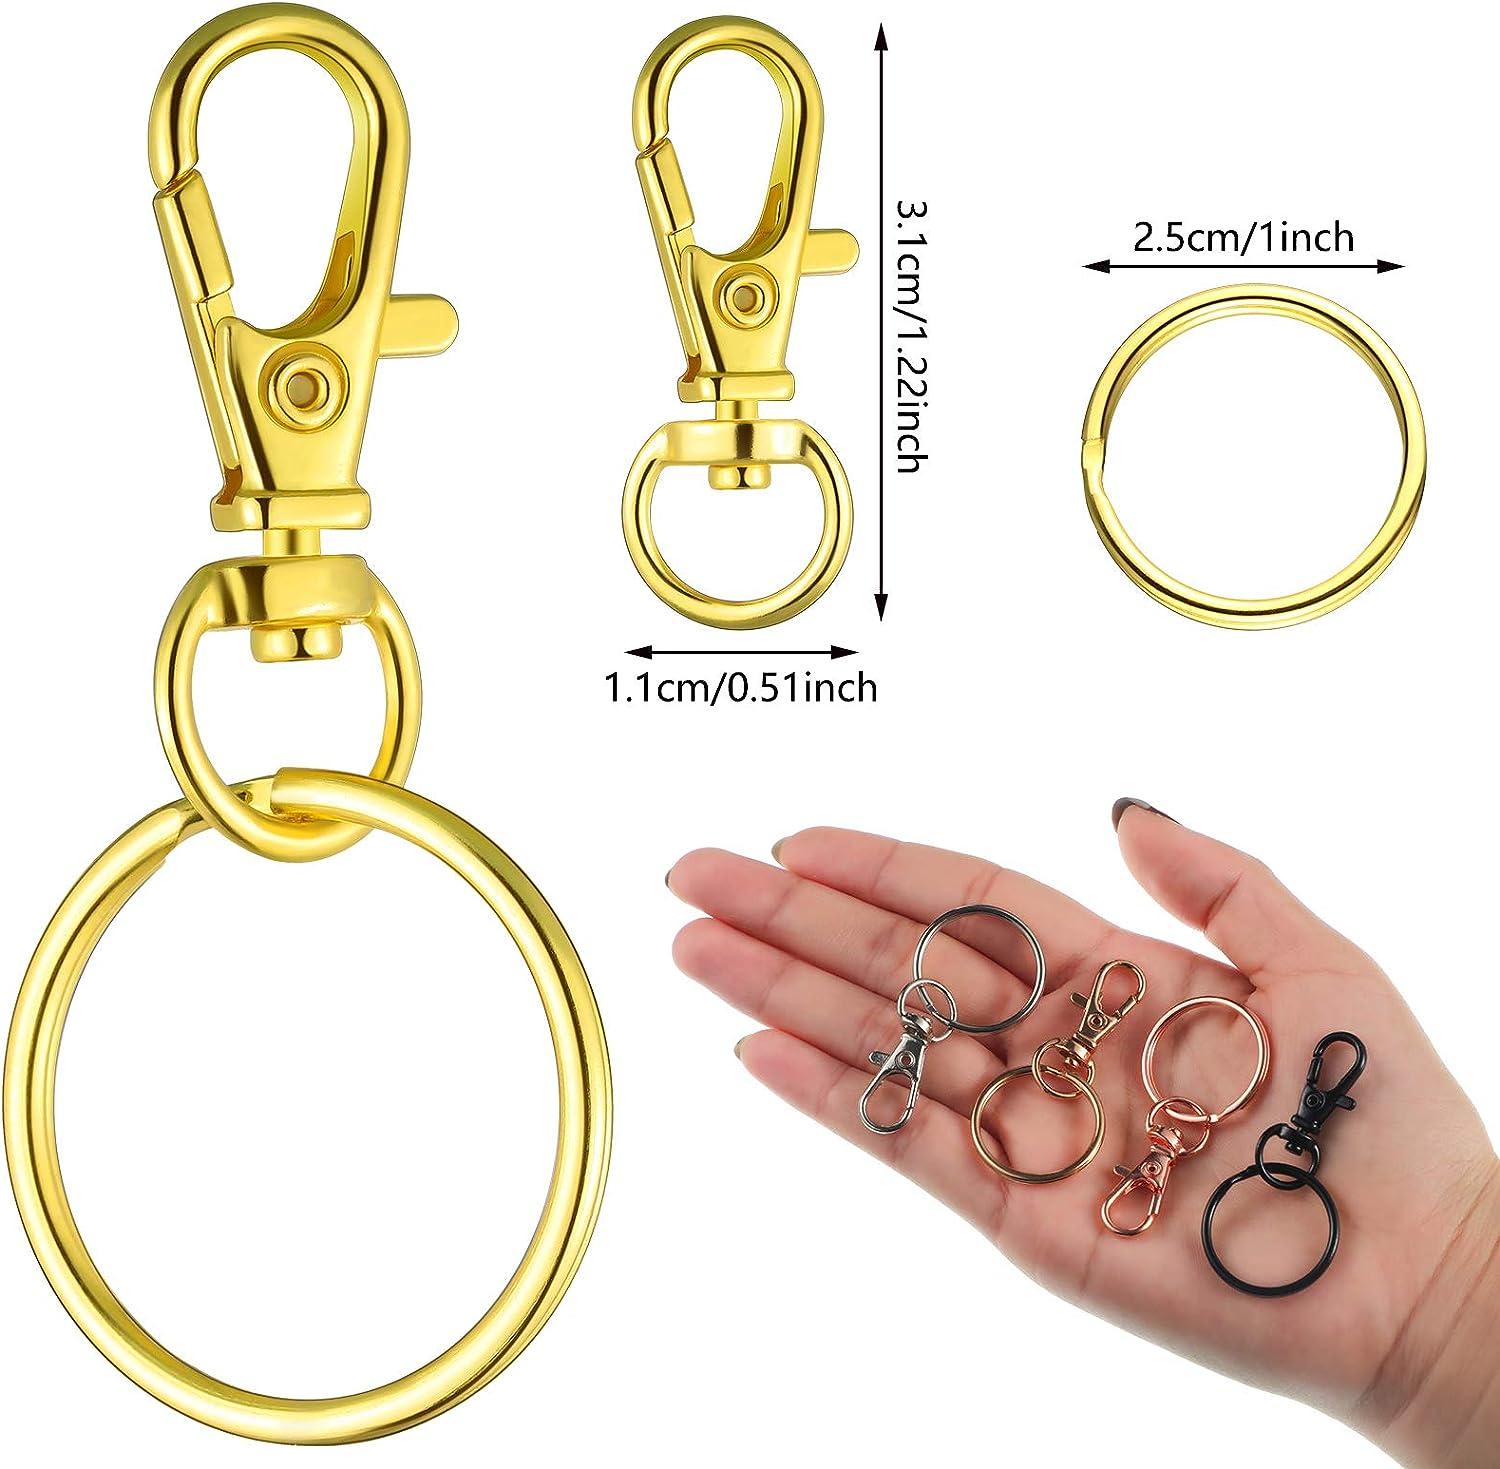 100 Pieces Swivel Clasps Set 50 Piece Lanyard Snap Hooks with 50